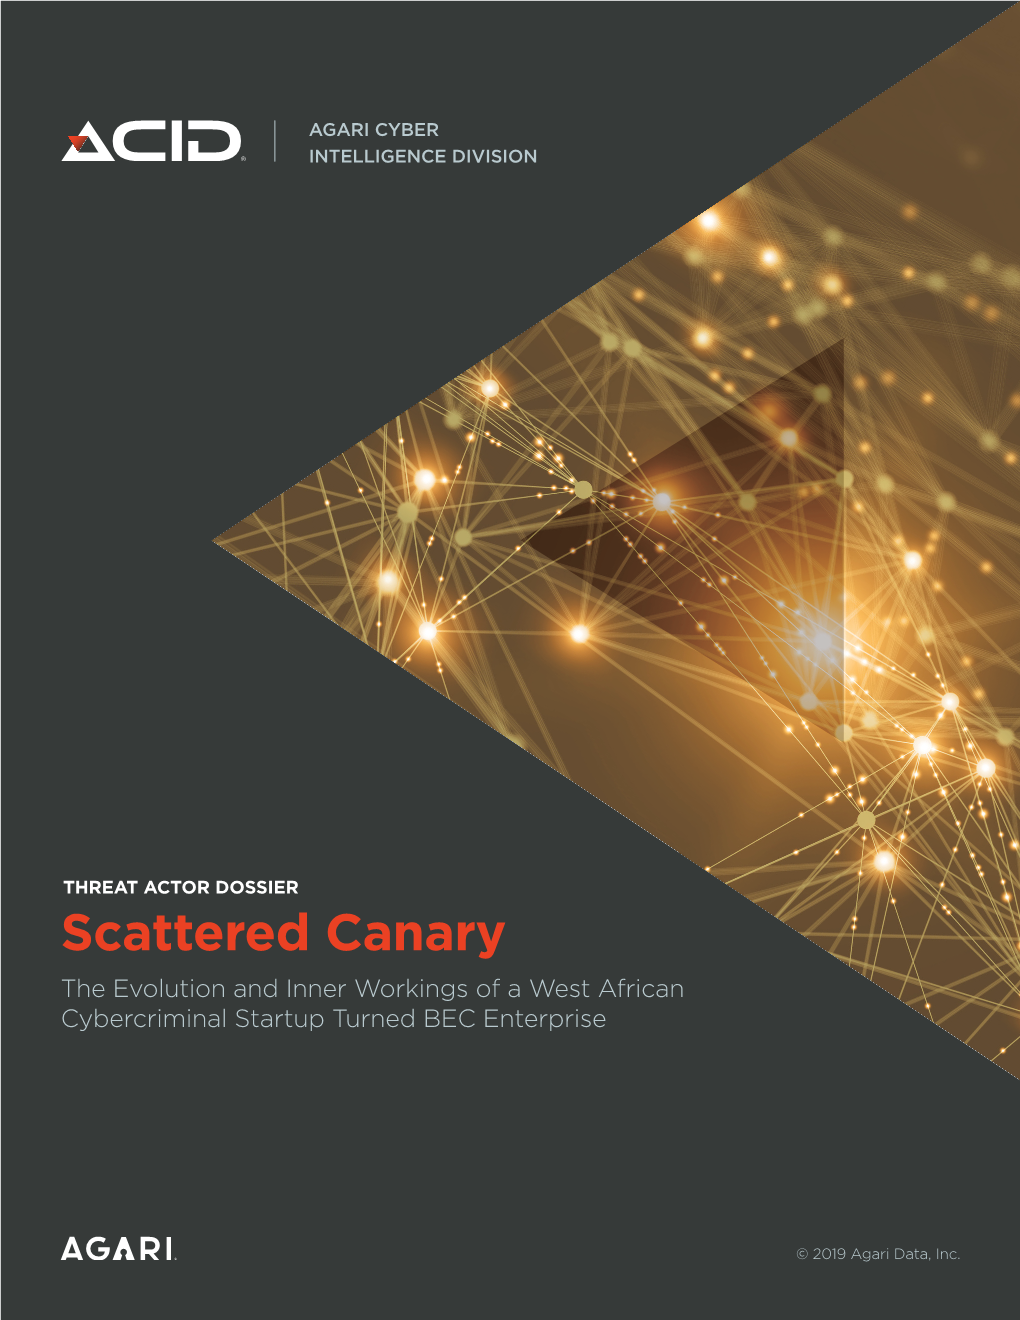 Scattered Canary the Evolution and Inner Workings of a West African Cybercriminal Startup Turned BEC Enterprise